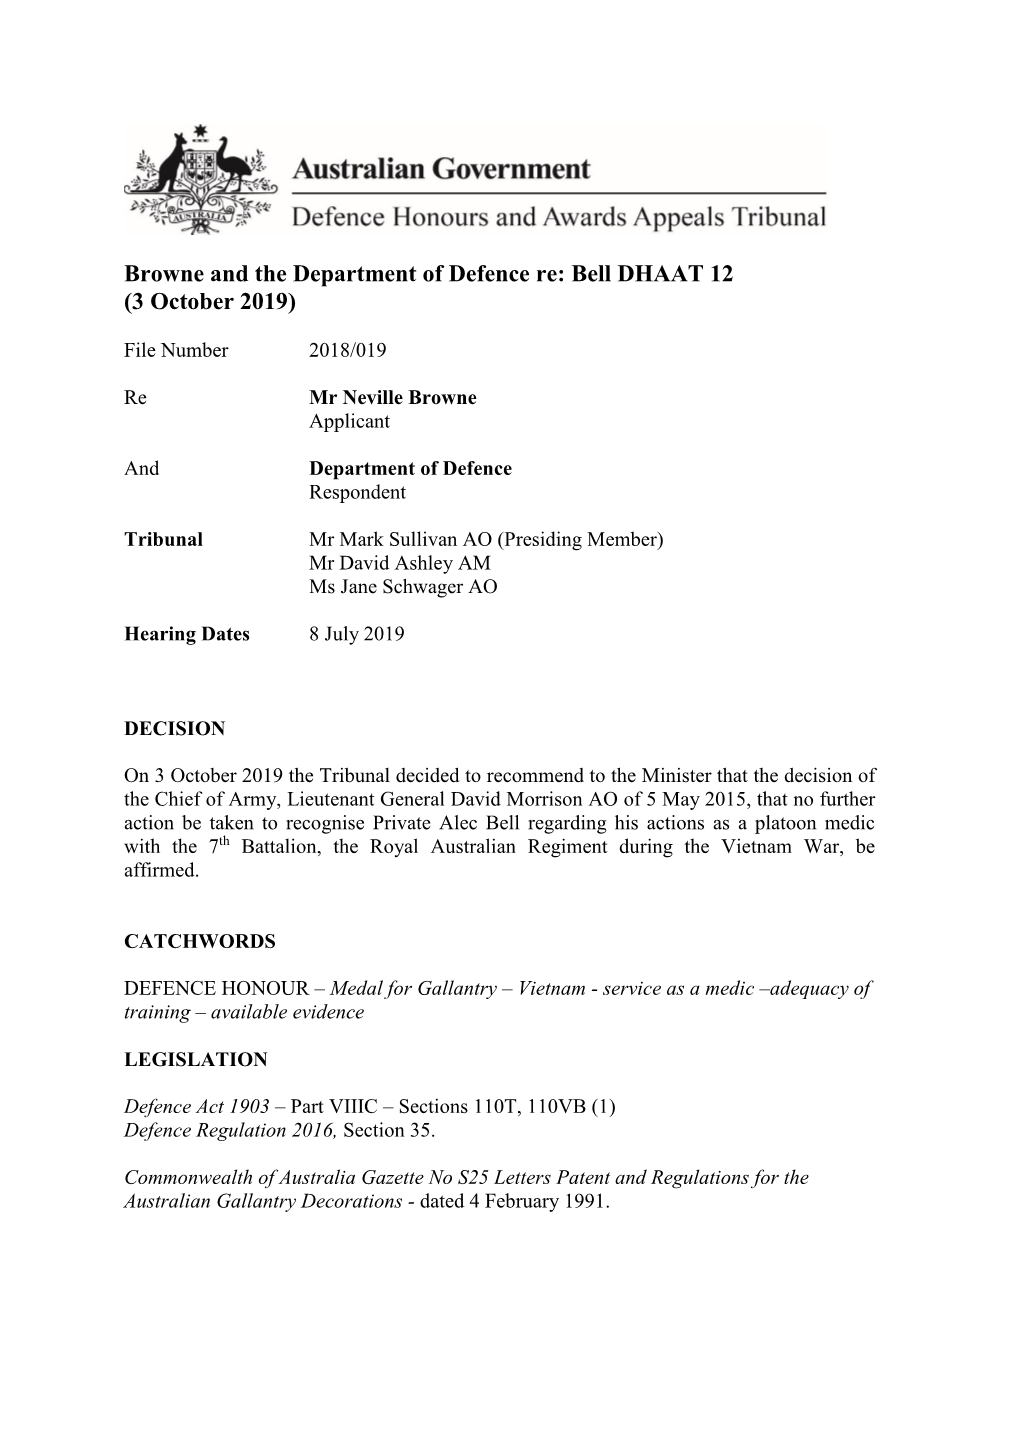 Browne and the Department of Defence Re: Bell DHAAT 12 (3 October 2019)